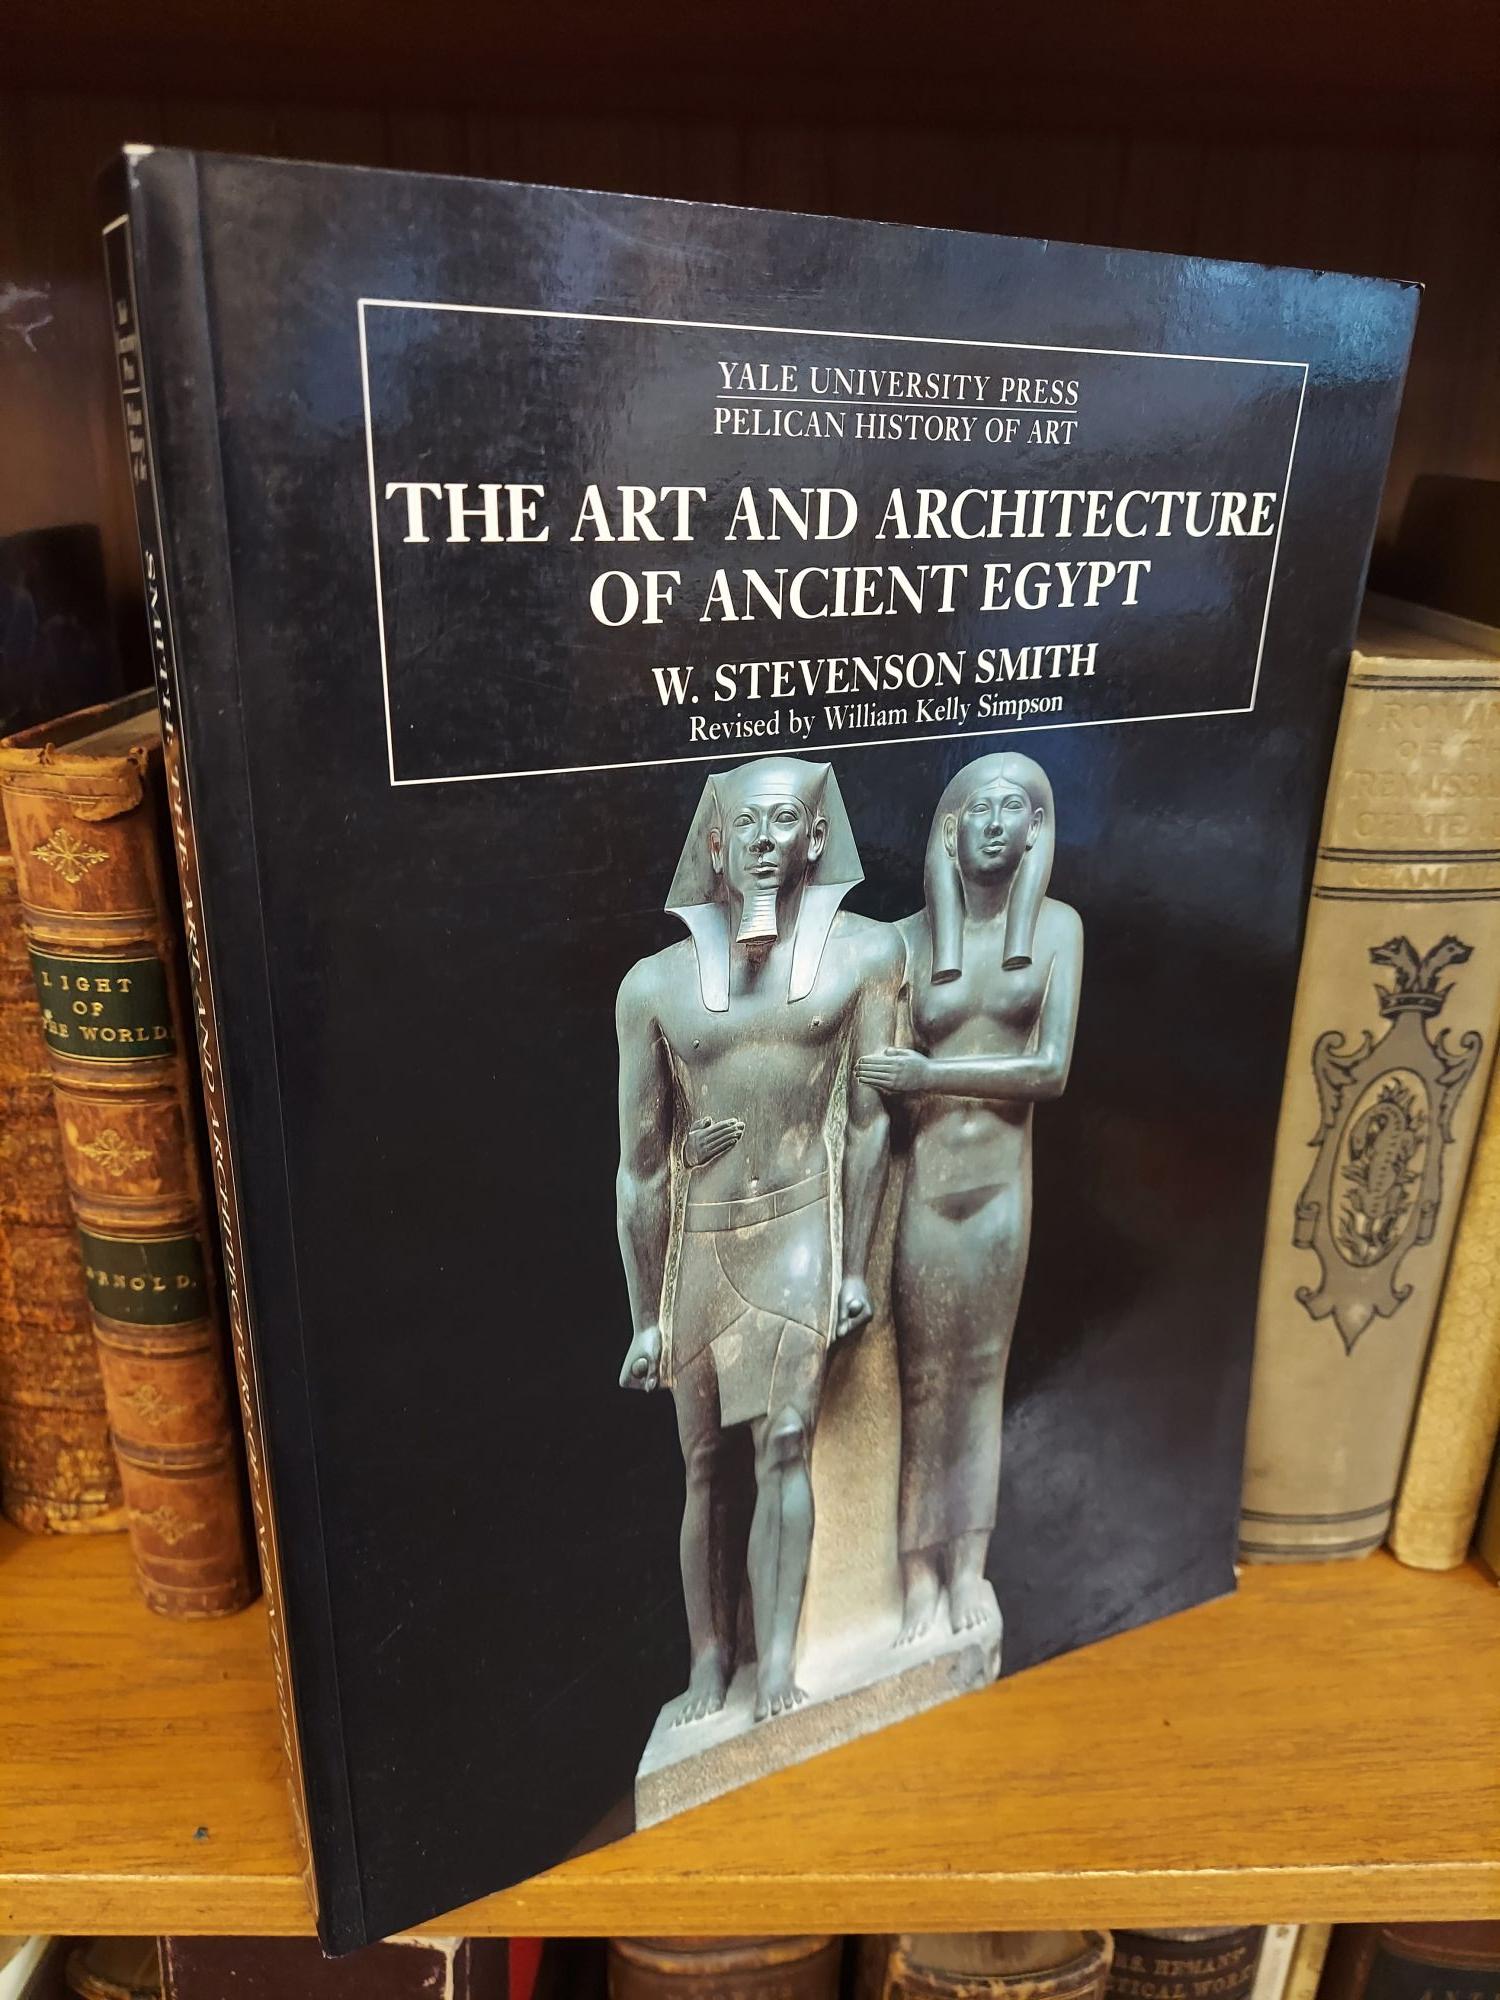 THE ART AND ARCHITECTURE OF ANCIENT EGYPT William Stevenson Smith,  William Kelly Simpson Third Edition